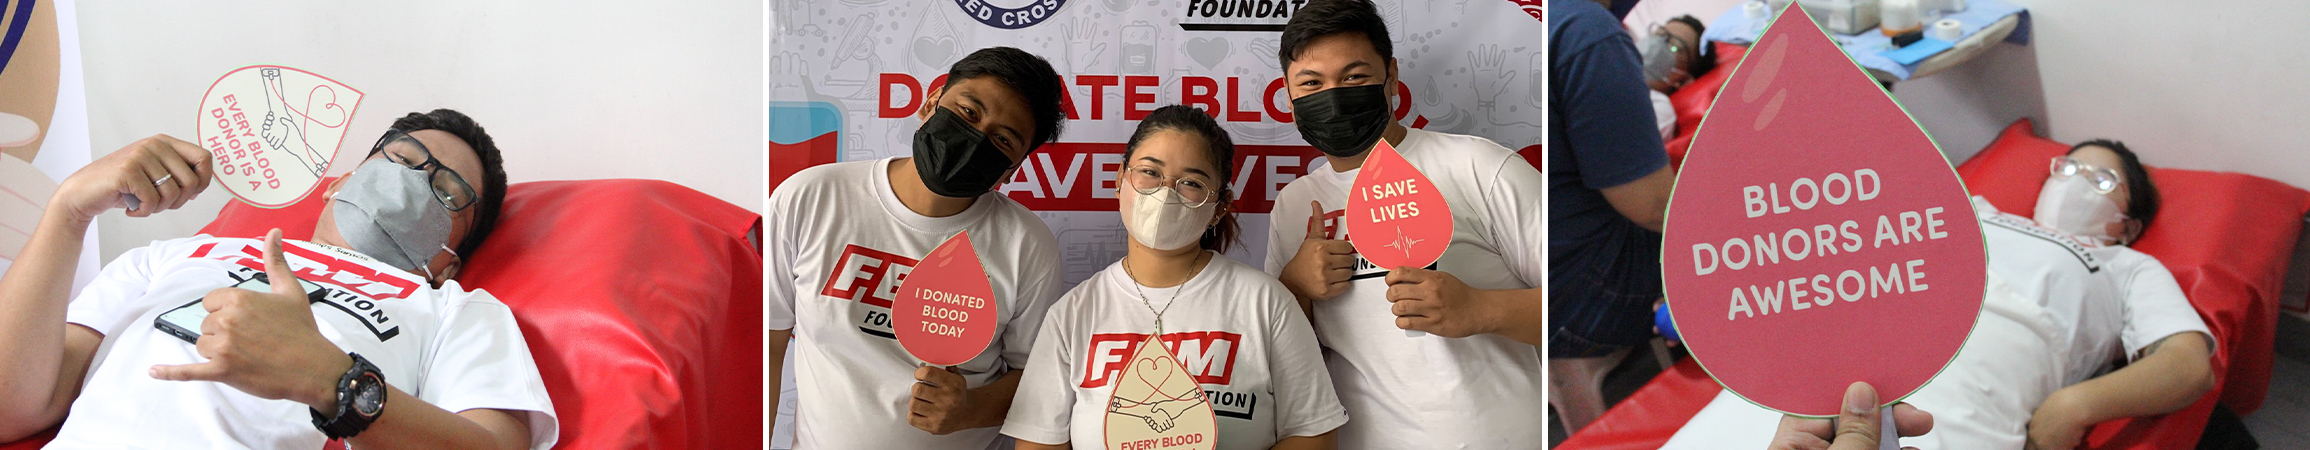 FBM Foundation and Philippine Red Cross did a Blood Donation Campaign in Pasig